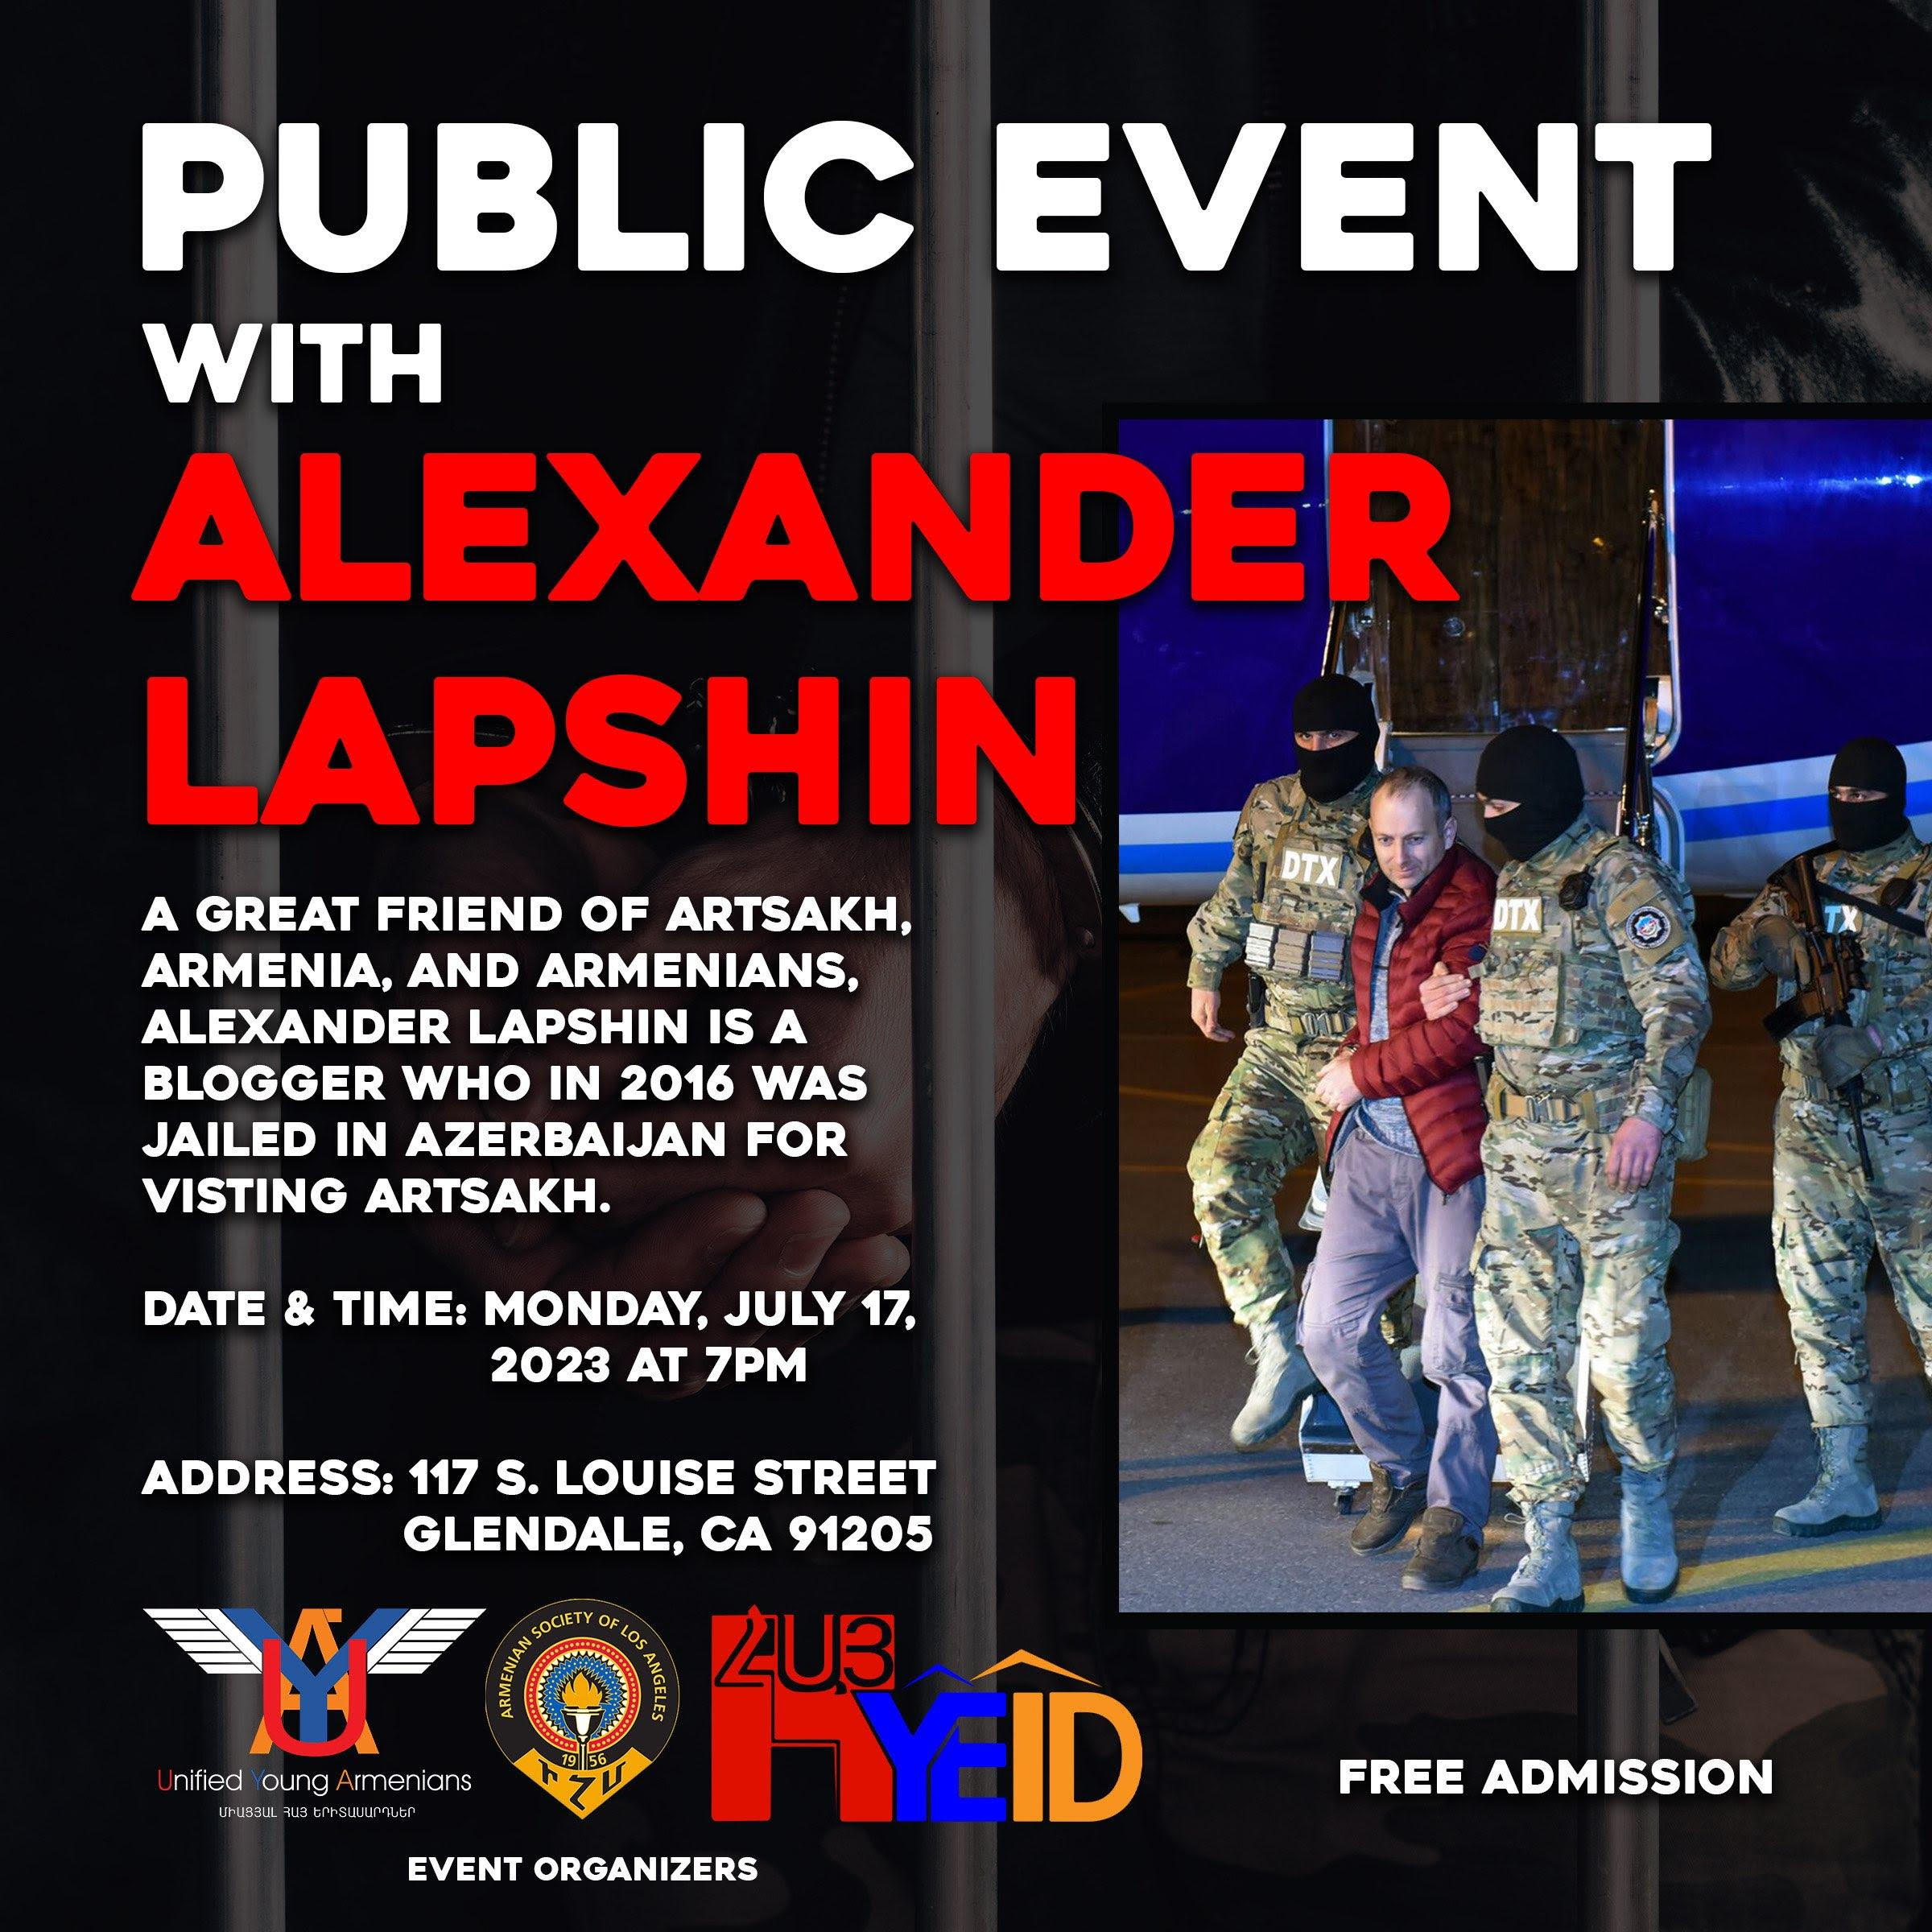 Please attend this very important meeting with Alexander Lapshin, a great supporter of Artsakh and Armenia.